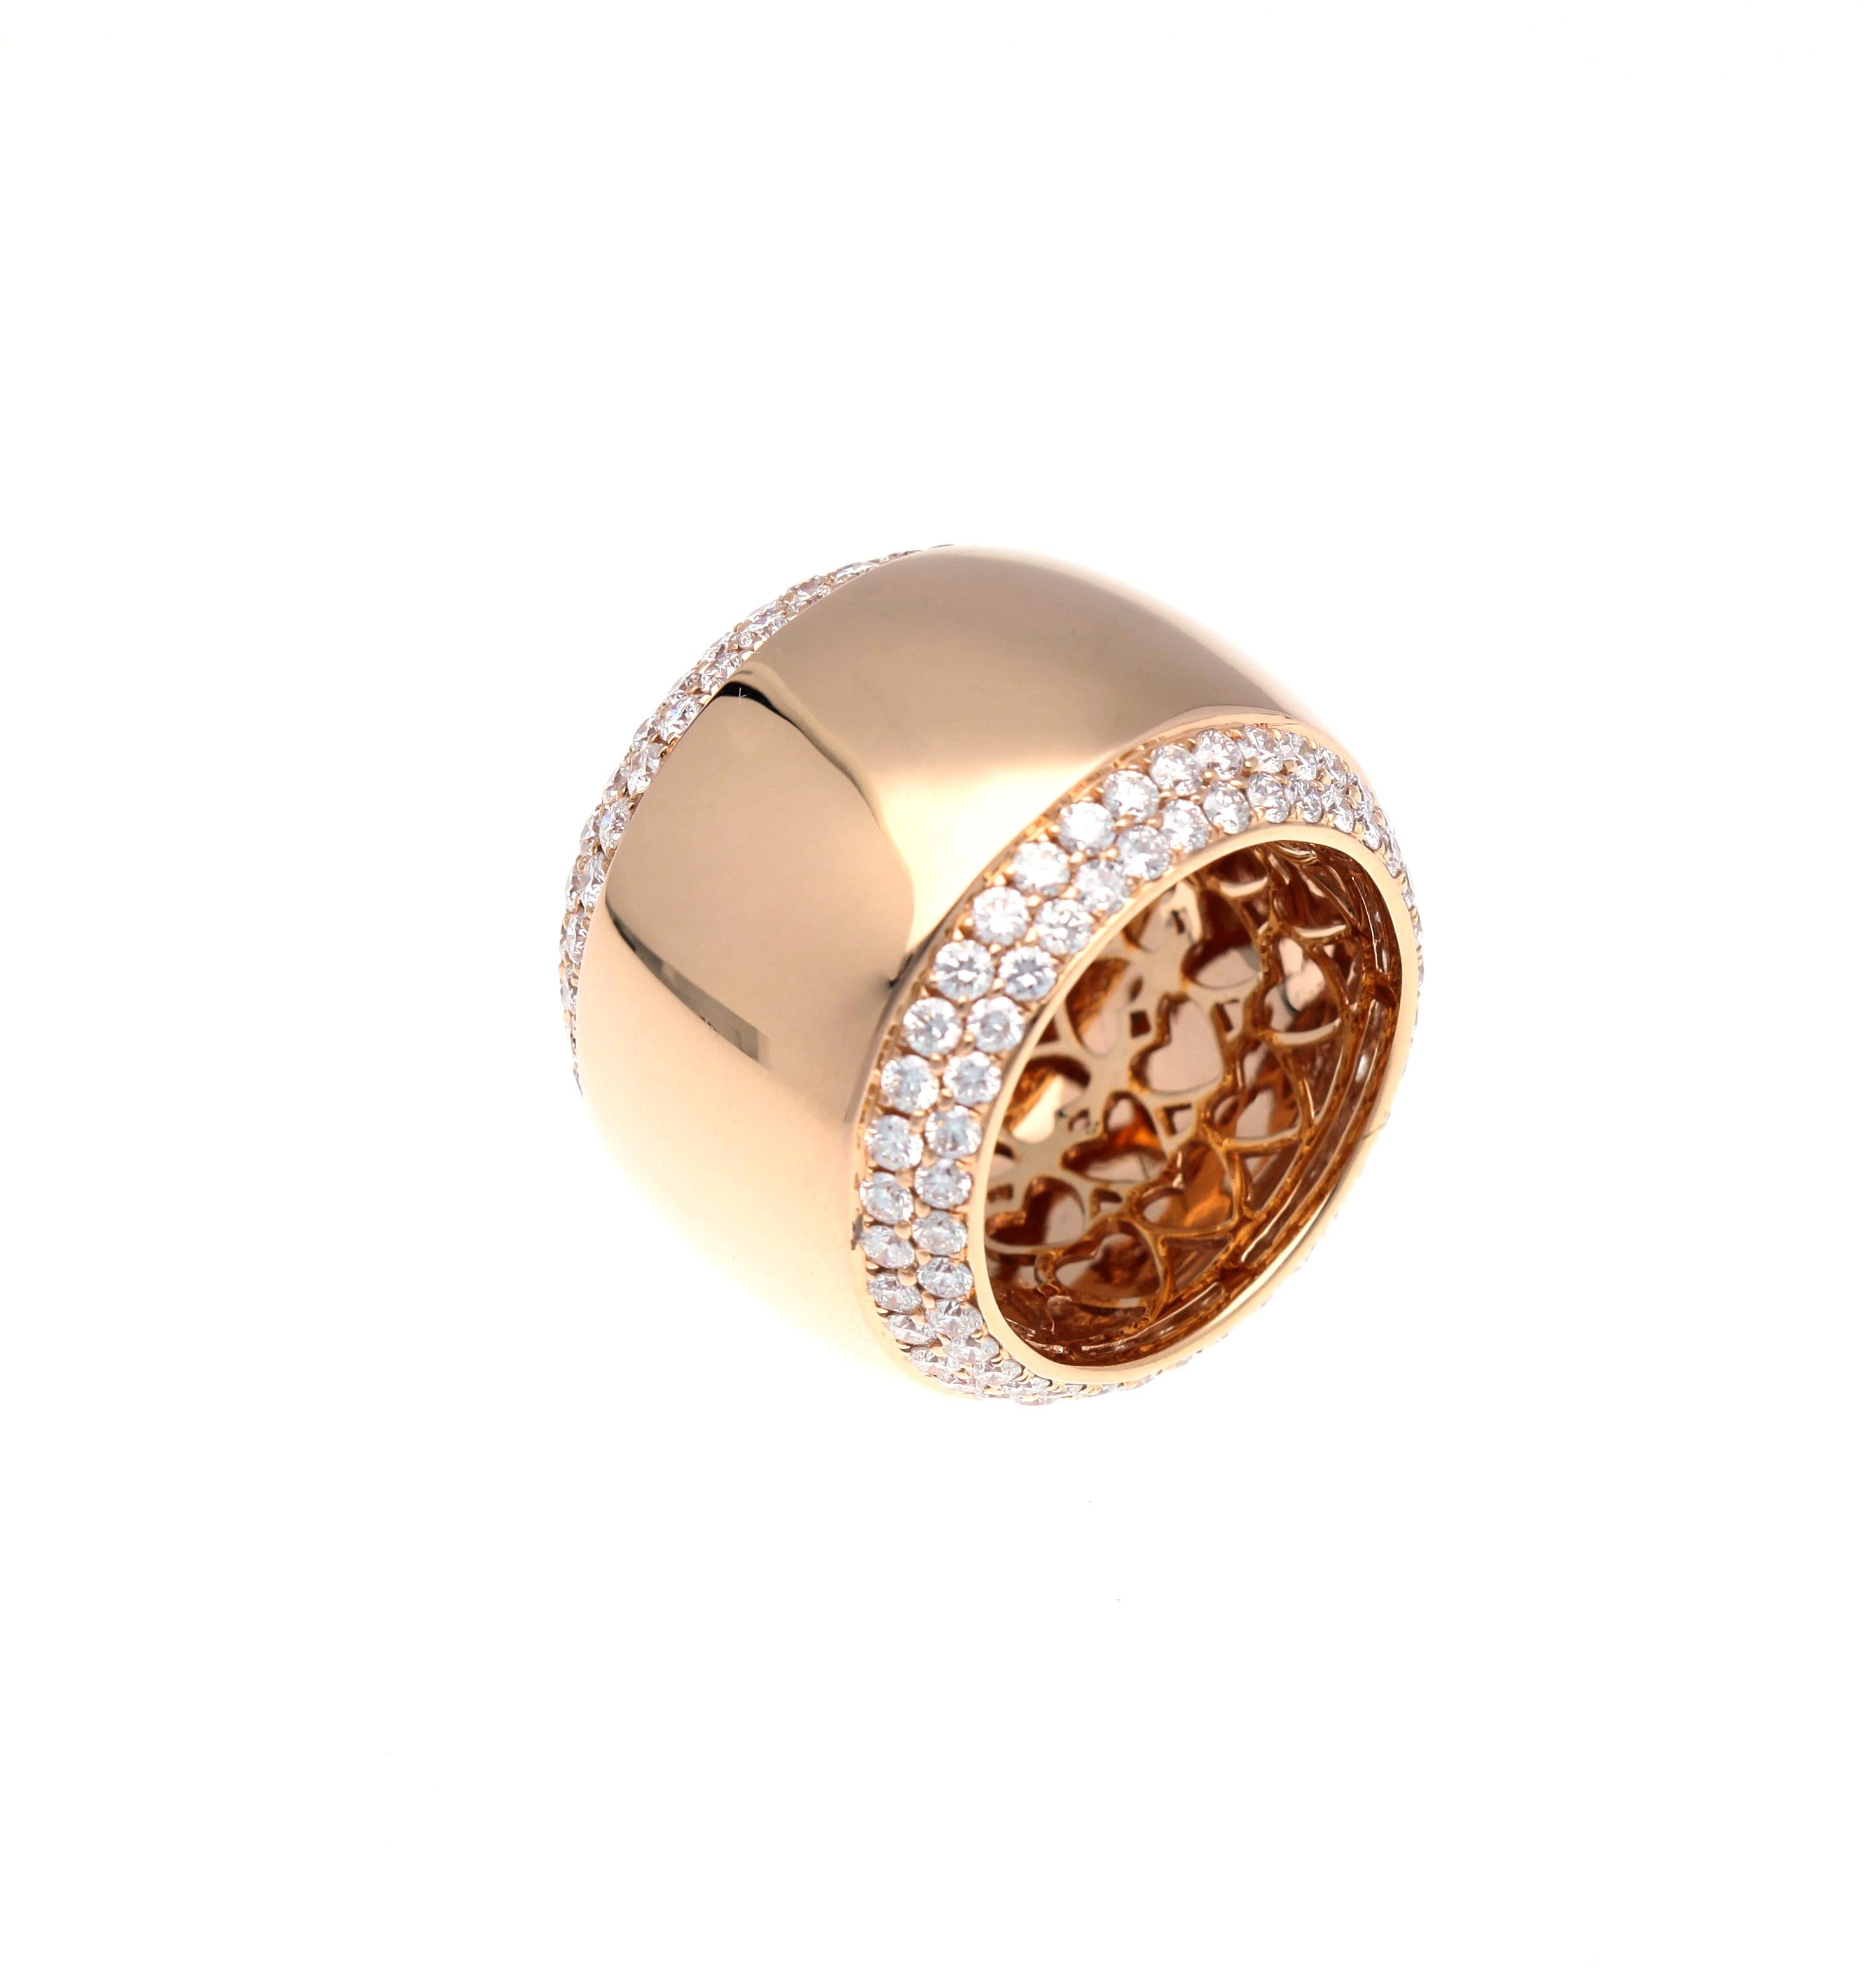 Women's 18 Karat Rose Gold Band Ring with Diamonds Total Weight 3.39 Carat For Sale